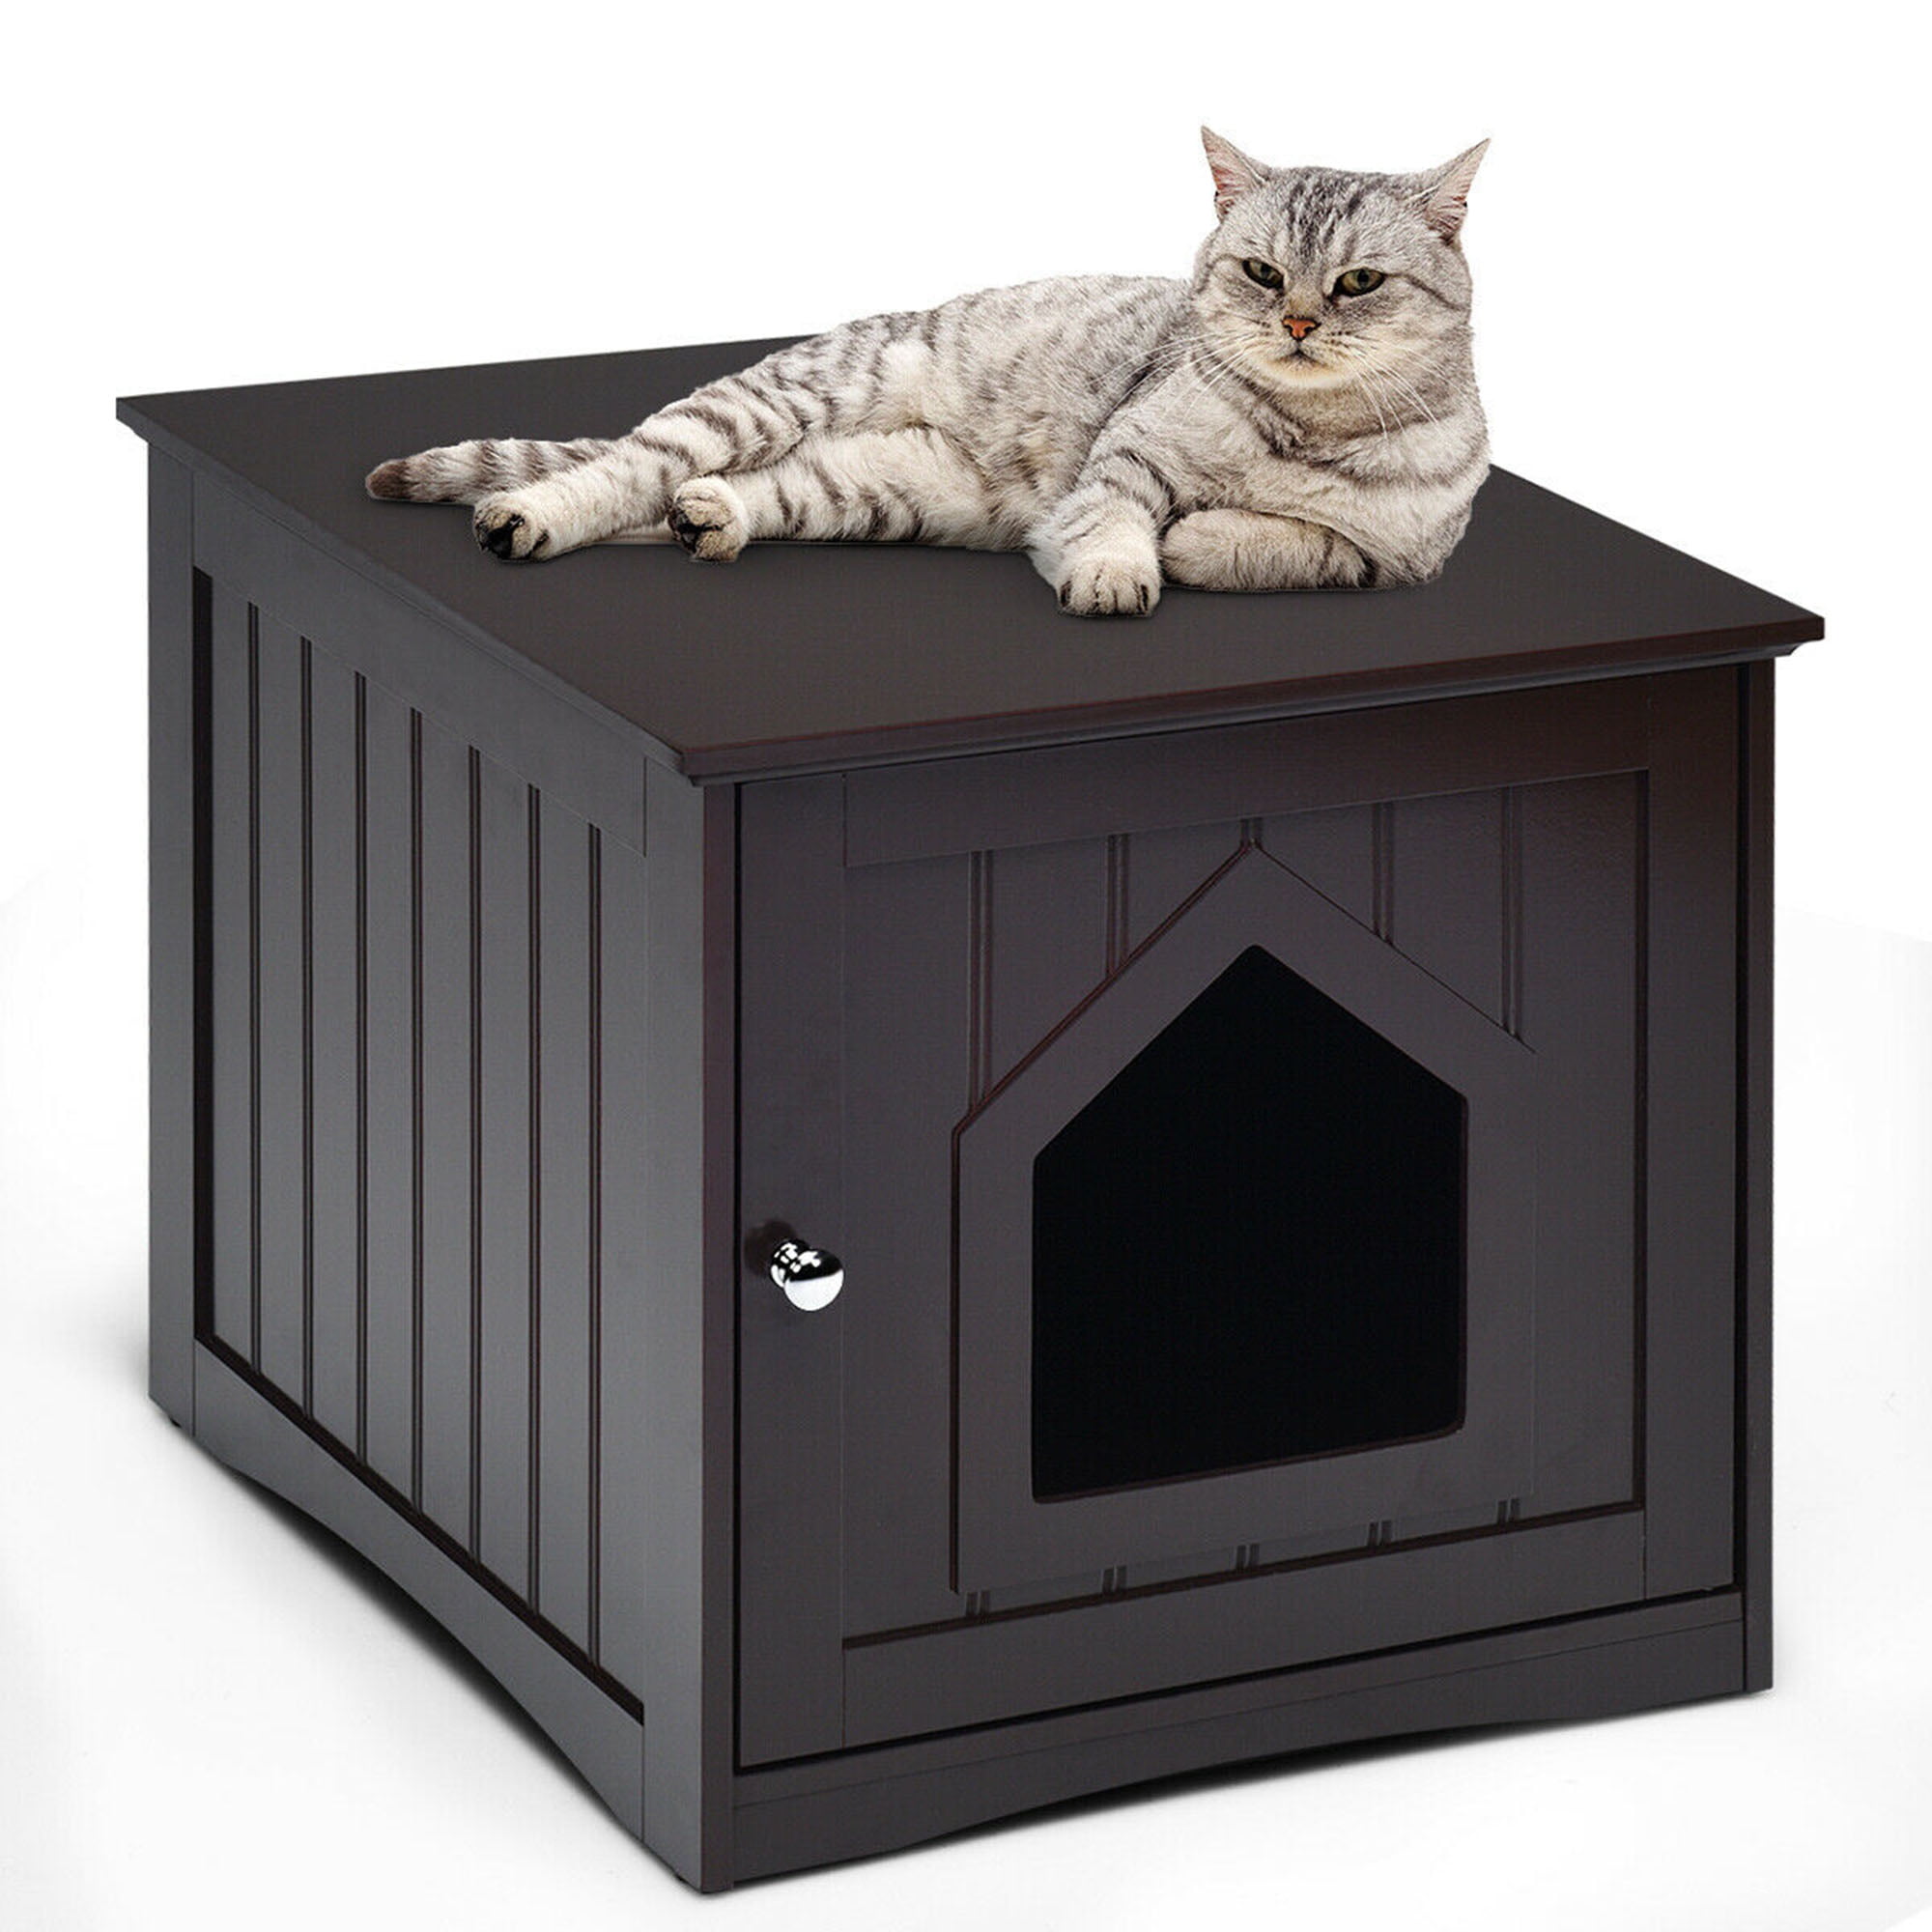 K&H Pet Products Thermo Mod Kitty Shelter Waterproof Outdoor Heated Cat House